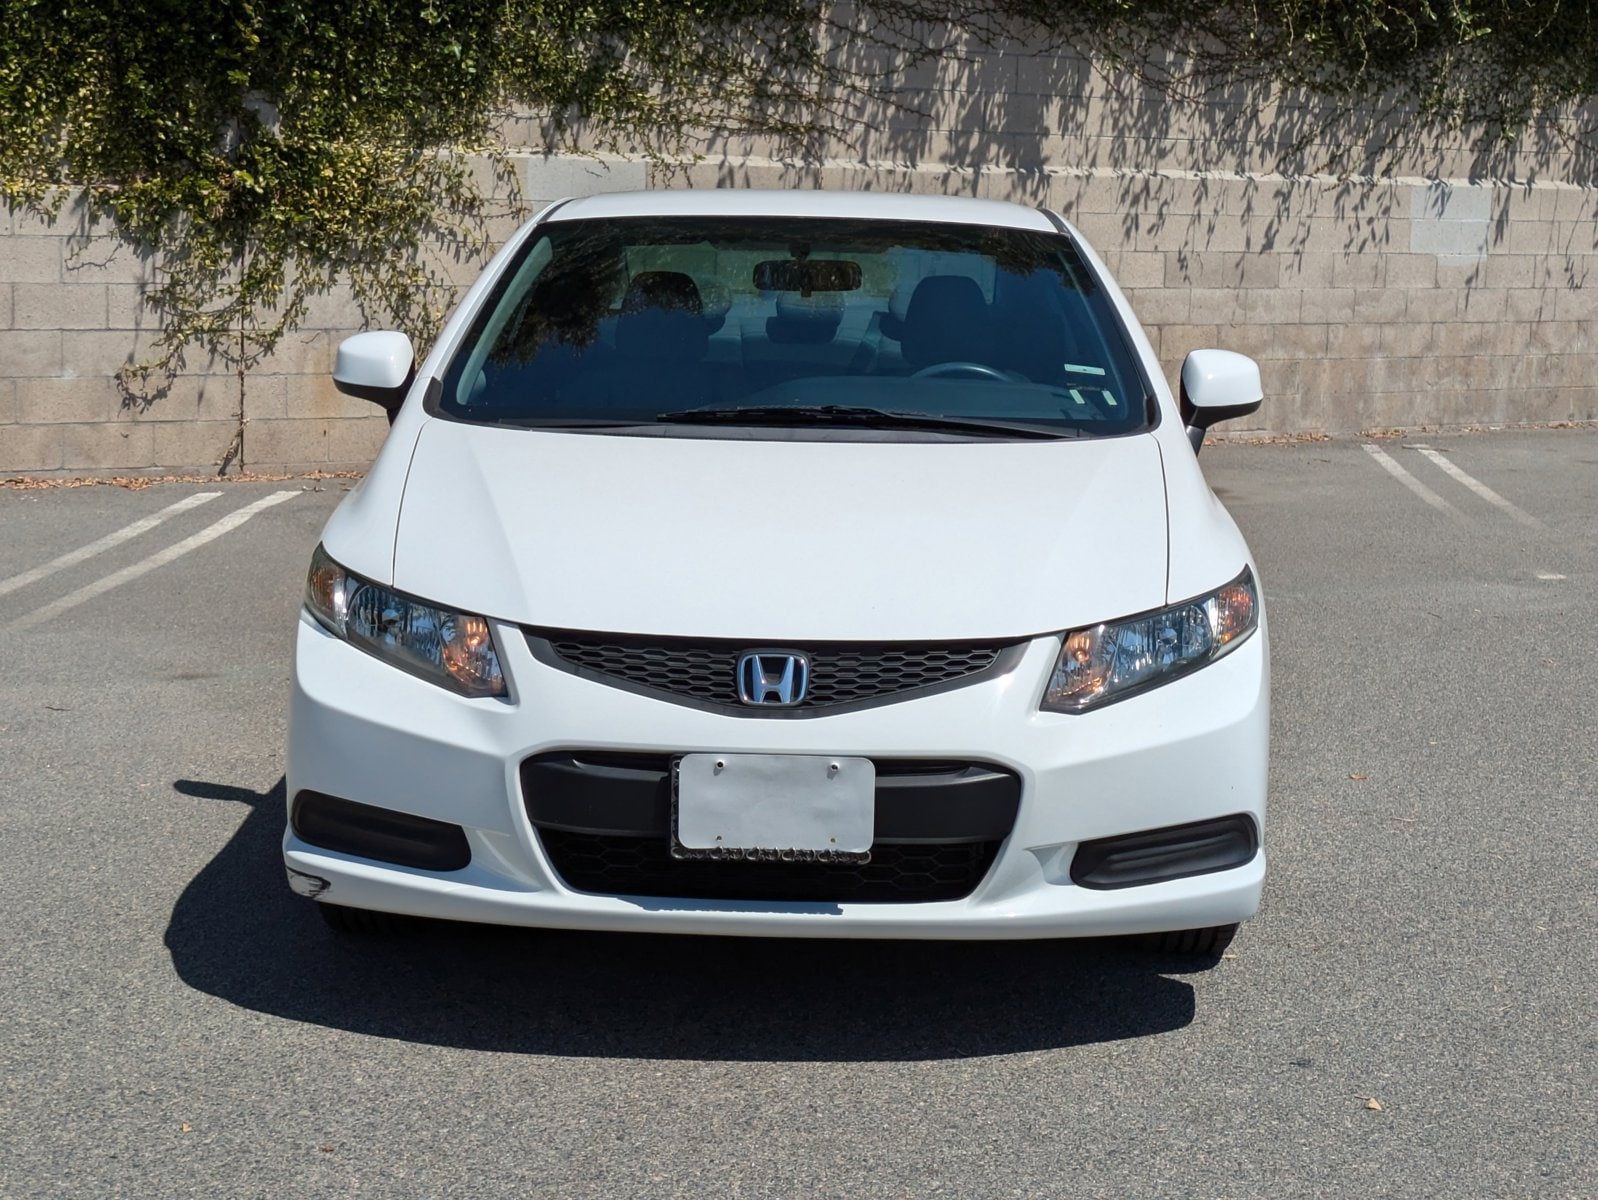 Used 2013 Honda Civic LX with VIN 2HGFG3B57DH512857 for sale in Costa Mesa, CA